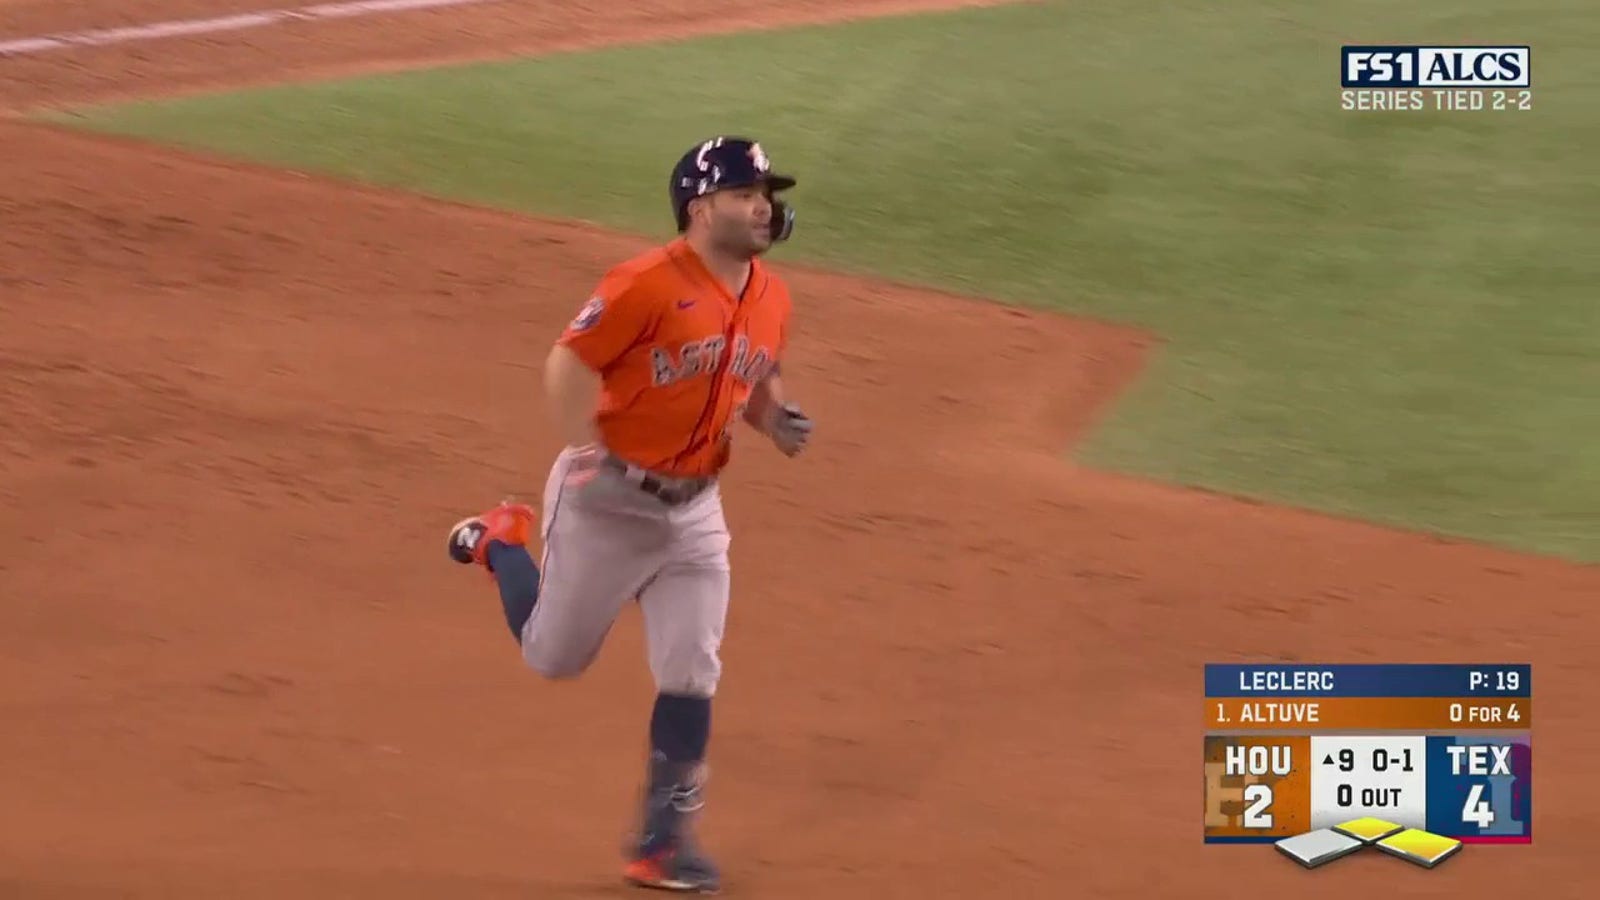 Jose Altuve crushes a go-ahead, three-run homer to give the Astros a 5-4 lead vs. the Rangers